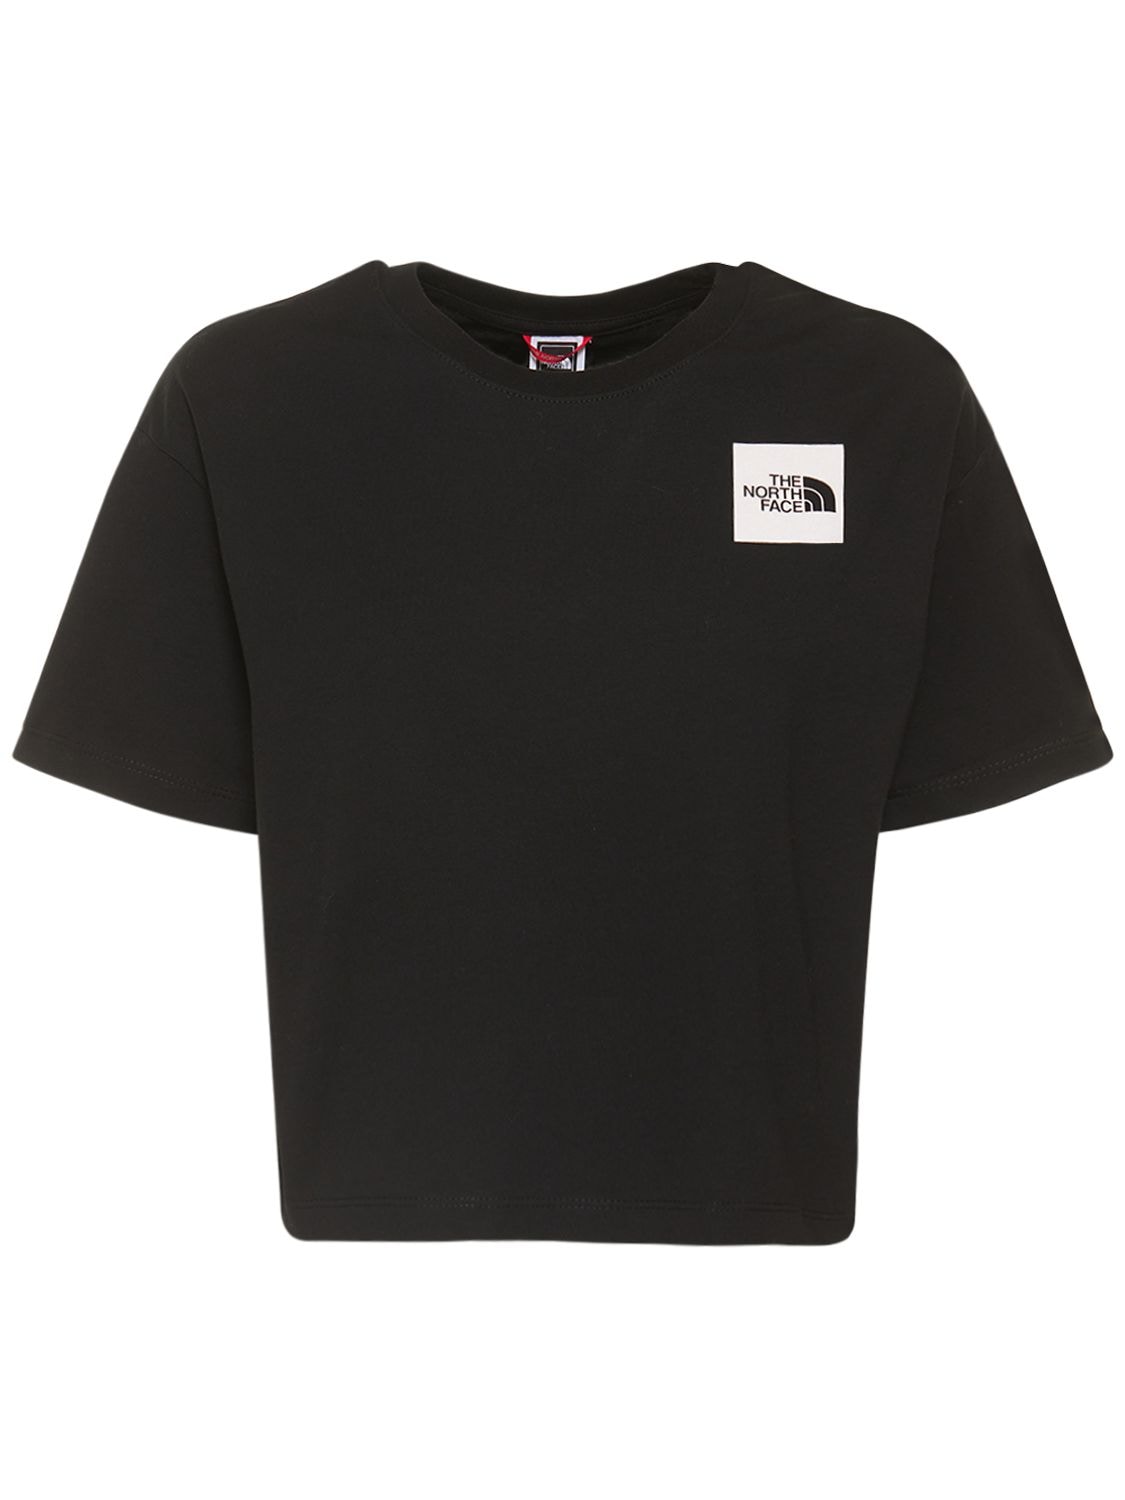 THE NORTH FACE FINE COTTON JERSEY CROPPED T-SHIRT